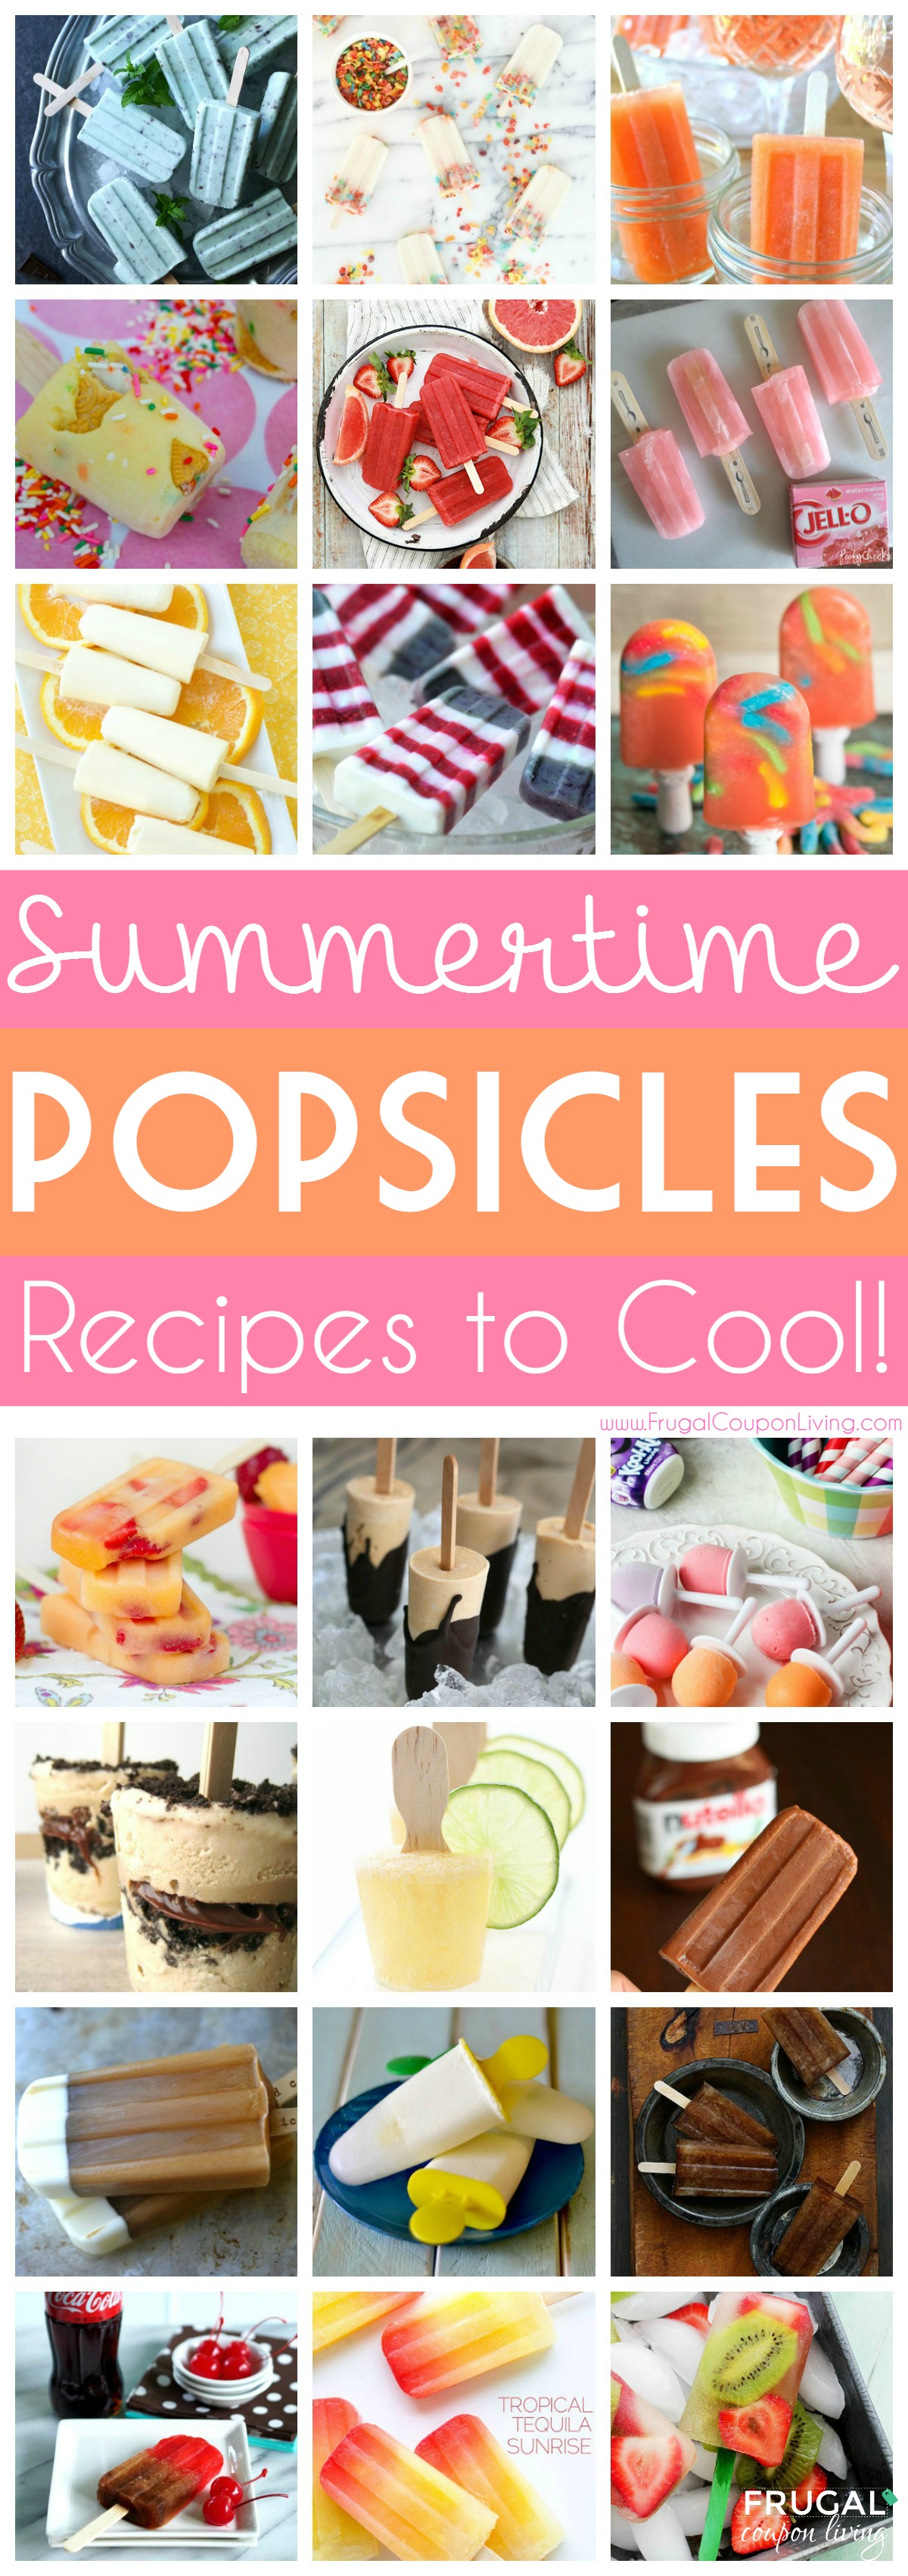 summertime-Popsicles-Recipes-Collage-frugal-coupon-living